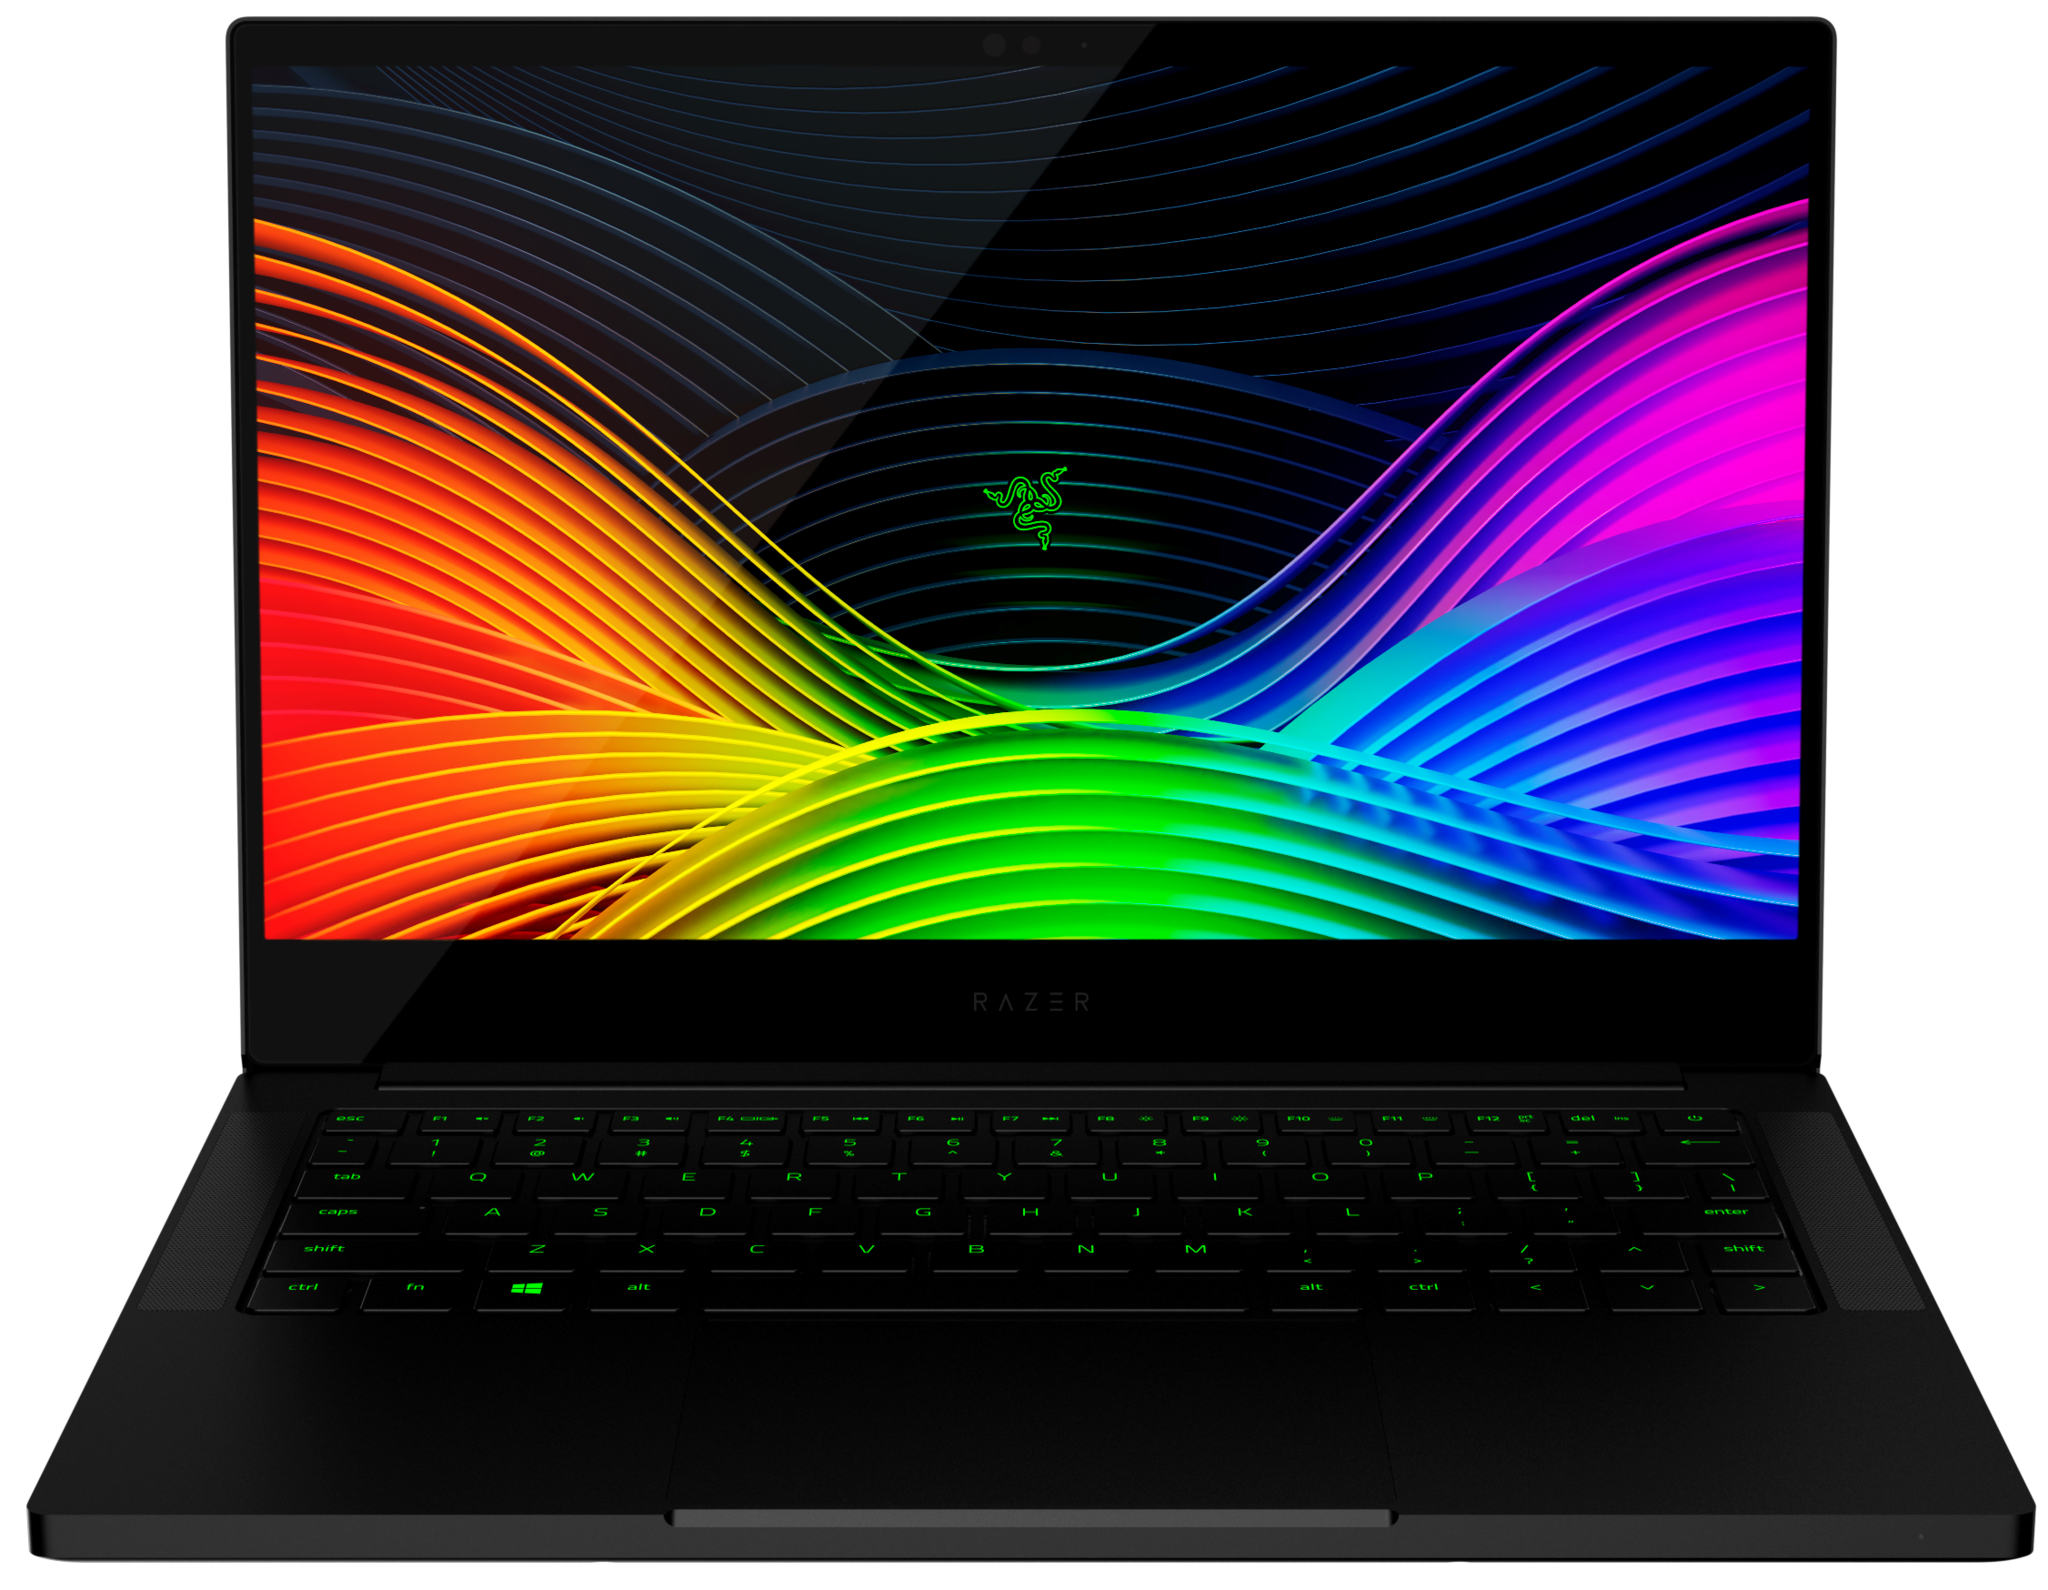 https://www.windowscentral.com/sites/wpcentral.com/files/field/image/2019/09/razer-blade-stealth-13-late-2019-cropped.png?itok=S_pUWE6g